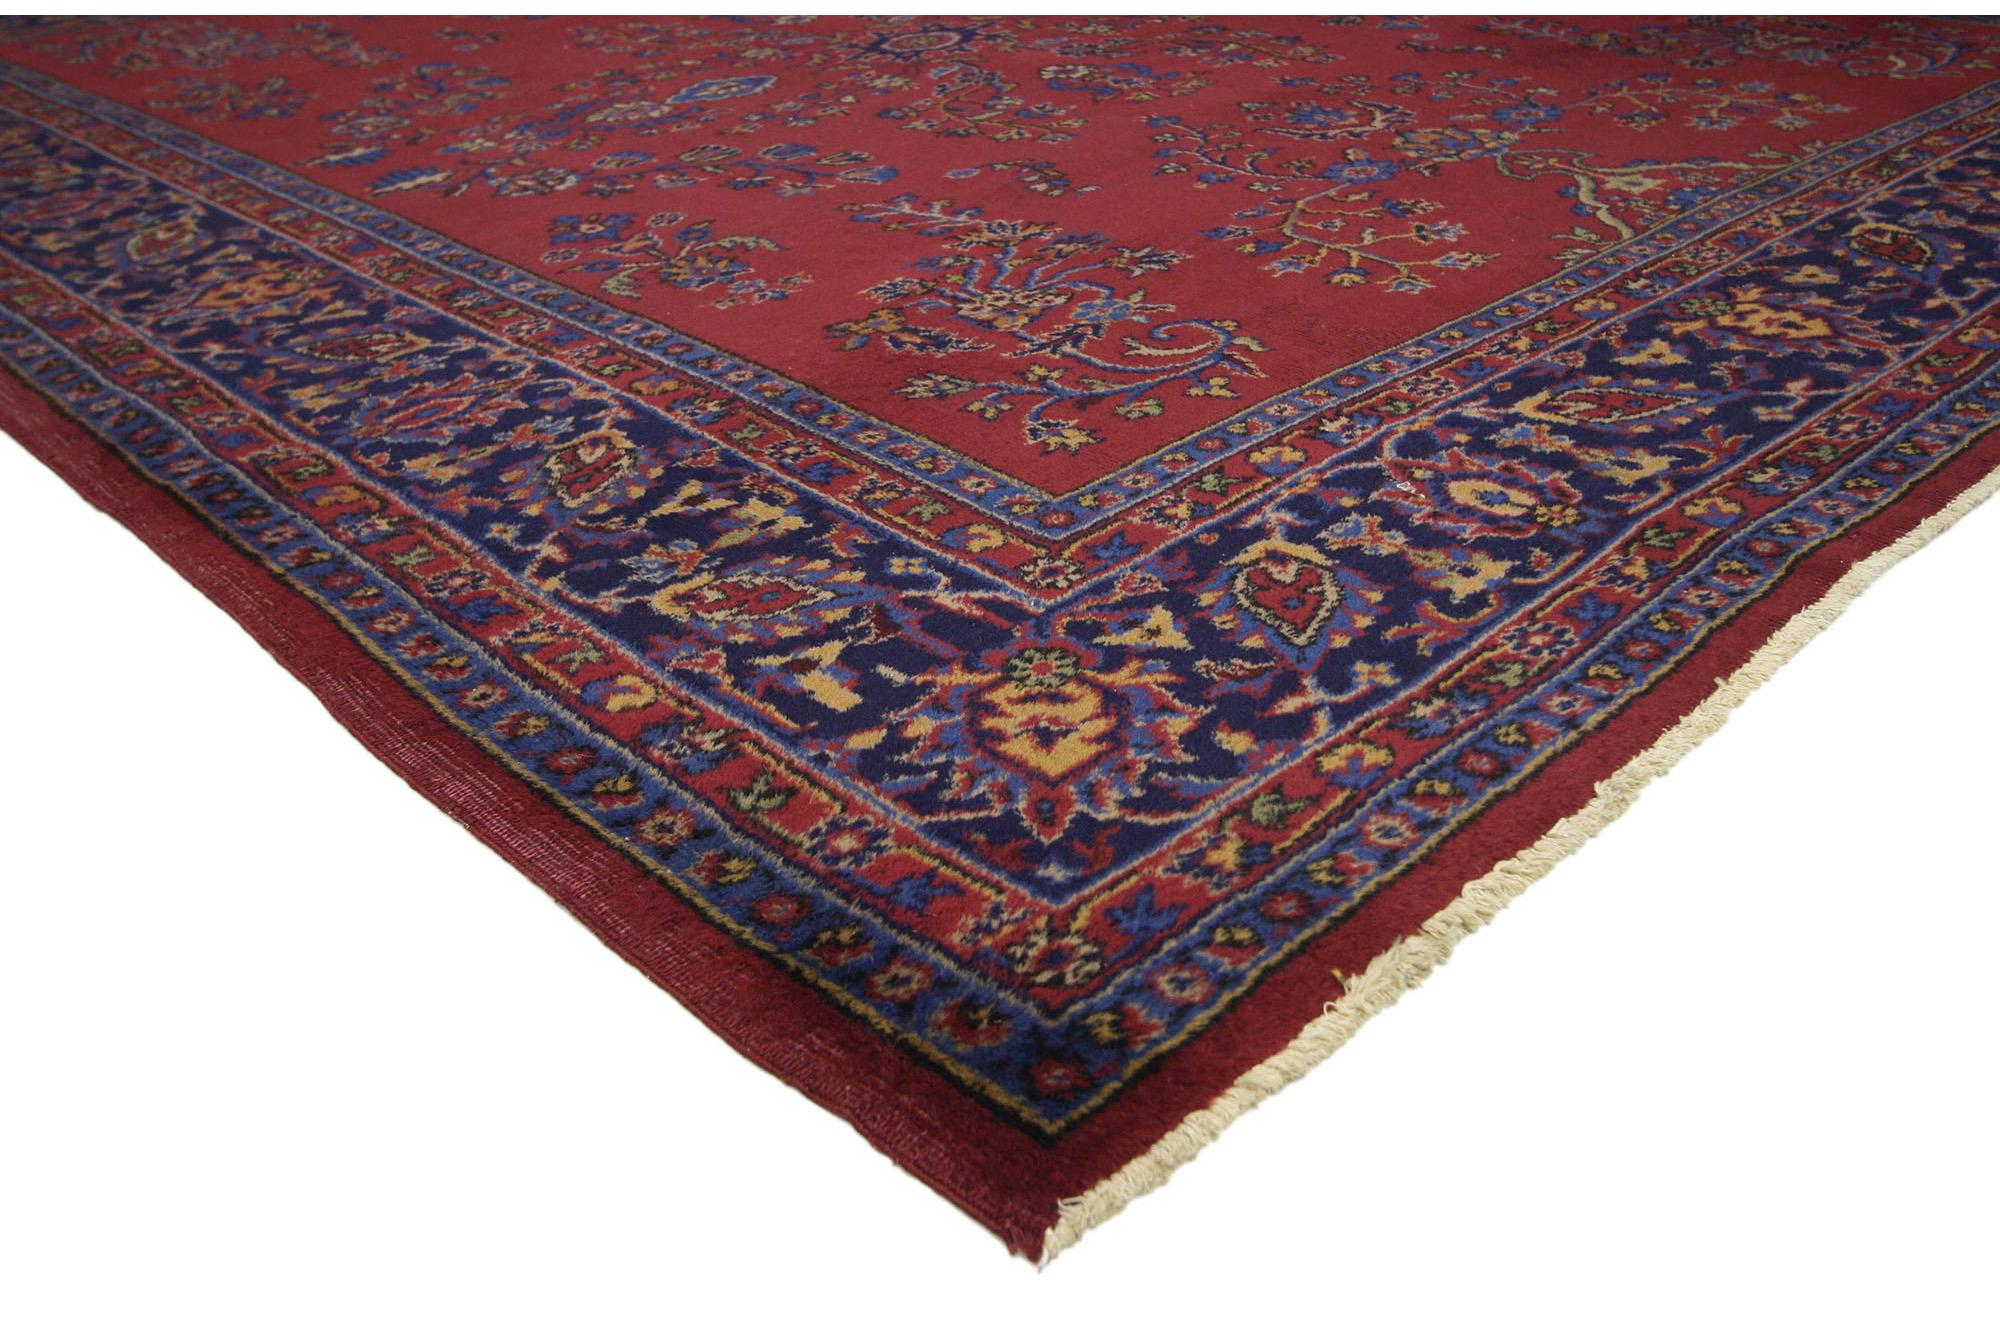 71538 Antique Turkish Sparta Rug, 08’00 x 09’08. 
Victorian exuberance meets Baroque opulence in this hand knotted wool antique Turkish Sparta rug. This enchanted antique Sparta rug weaves together the elaborate floral designs of historical Turkish